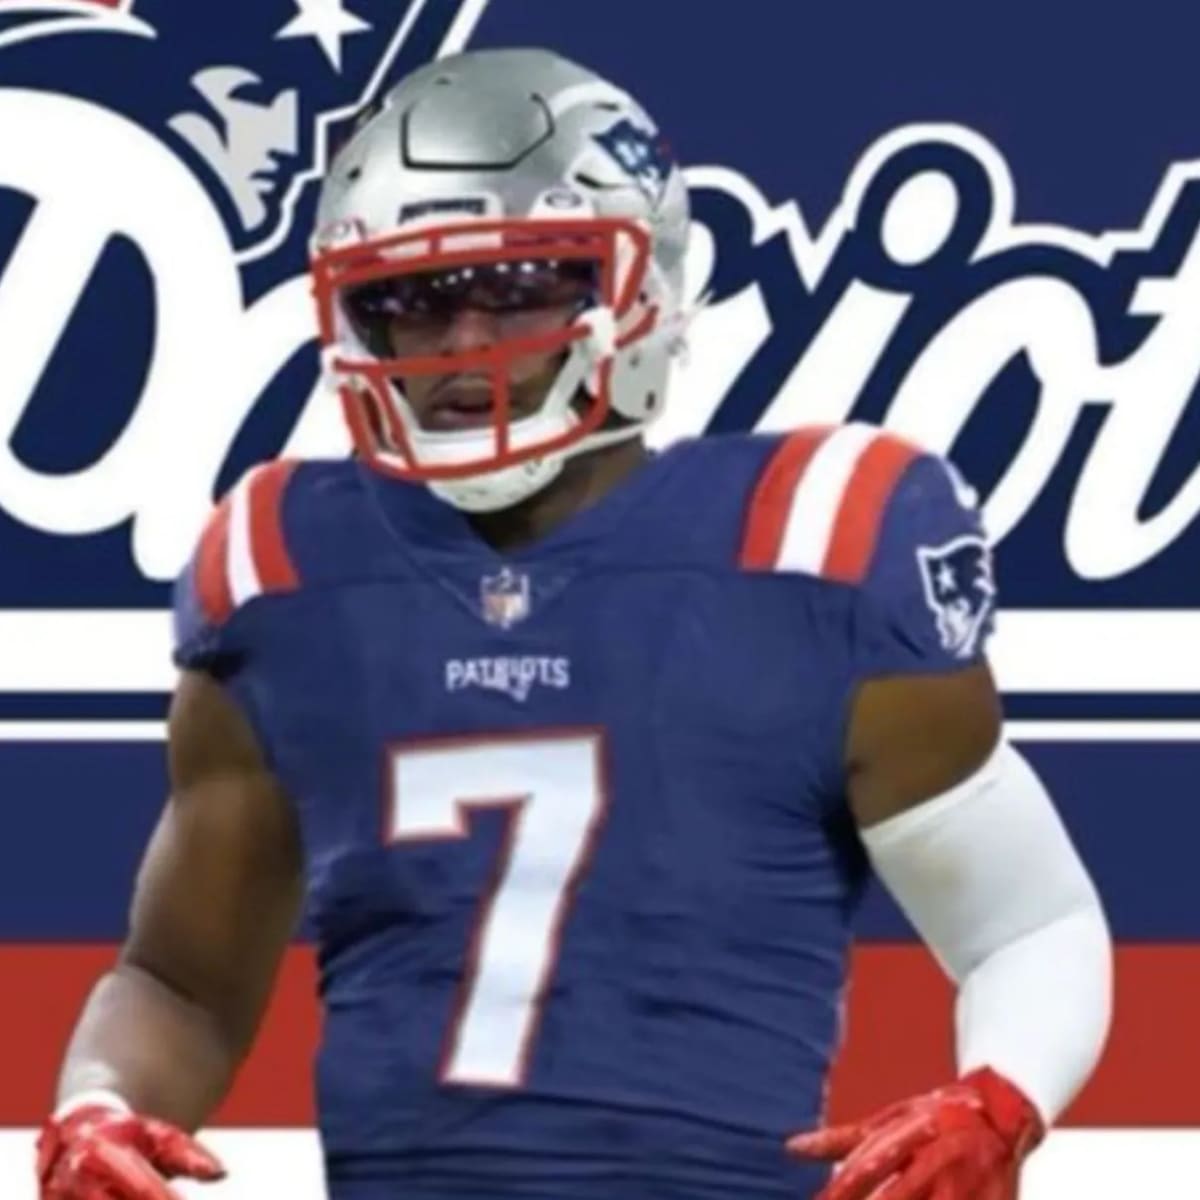 New Team, Same JuJu, as the newest member of the #Patriots arrived